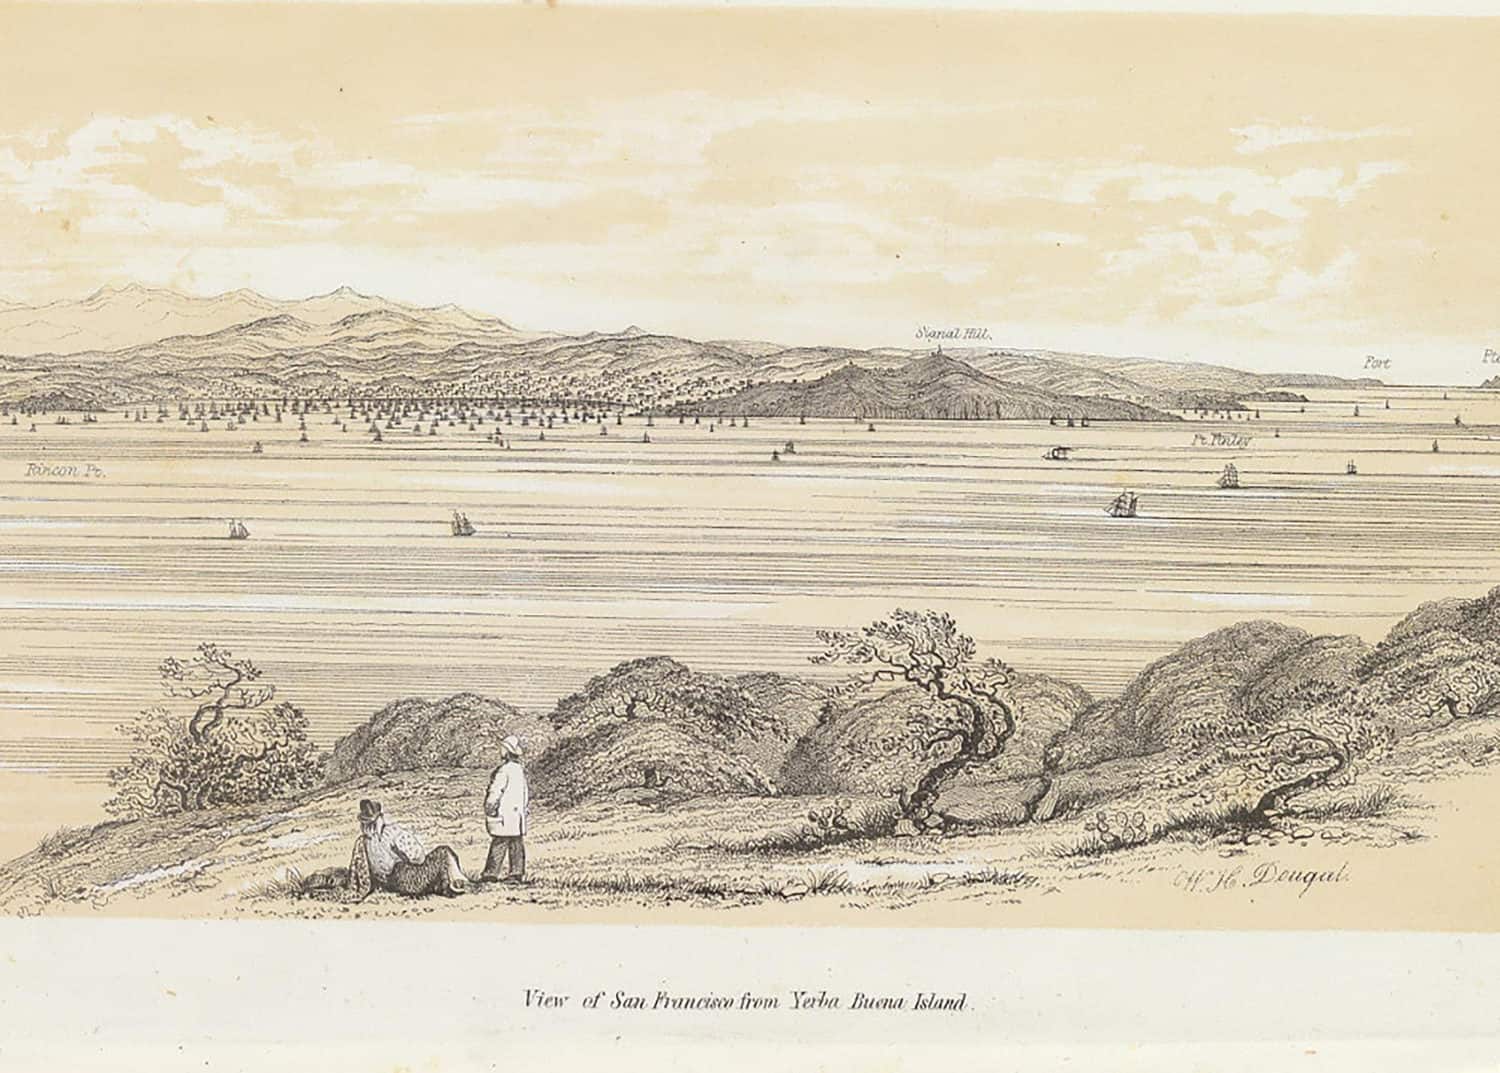 Historical drawing of first inhabitants of San Francisco Bay. Sketch of two men sitting on the island hillside.